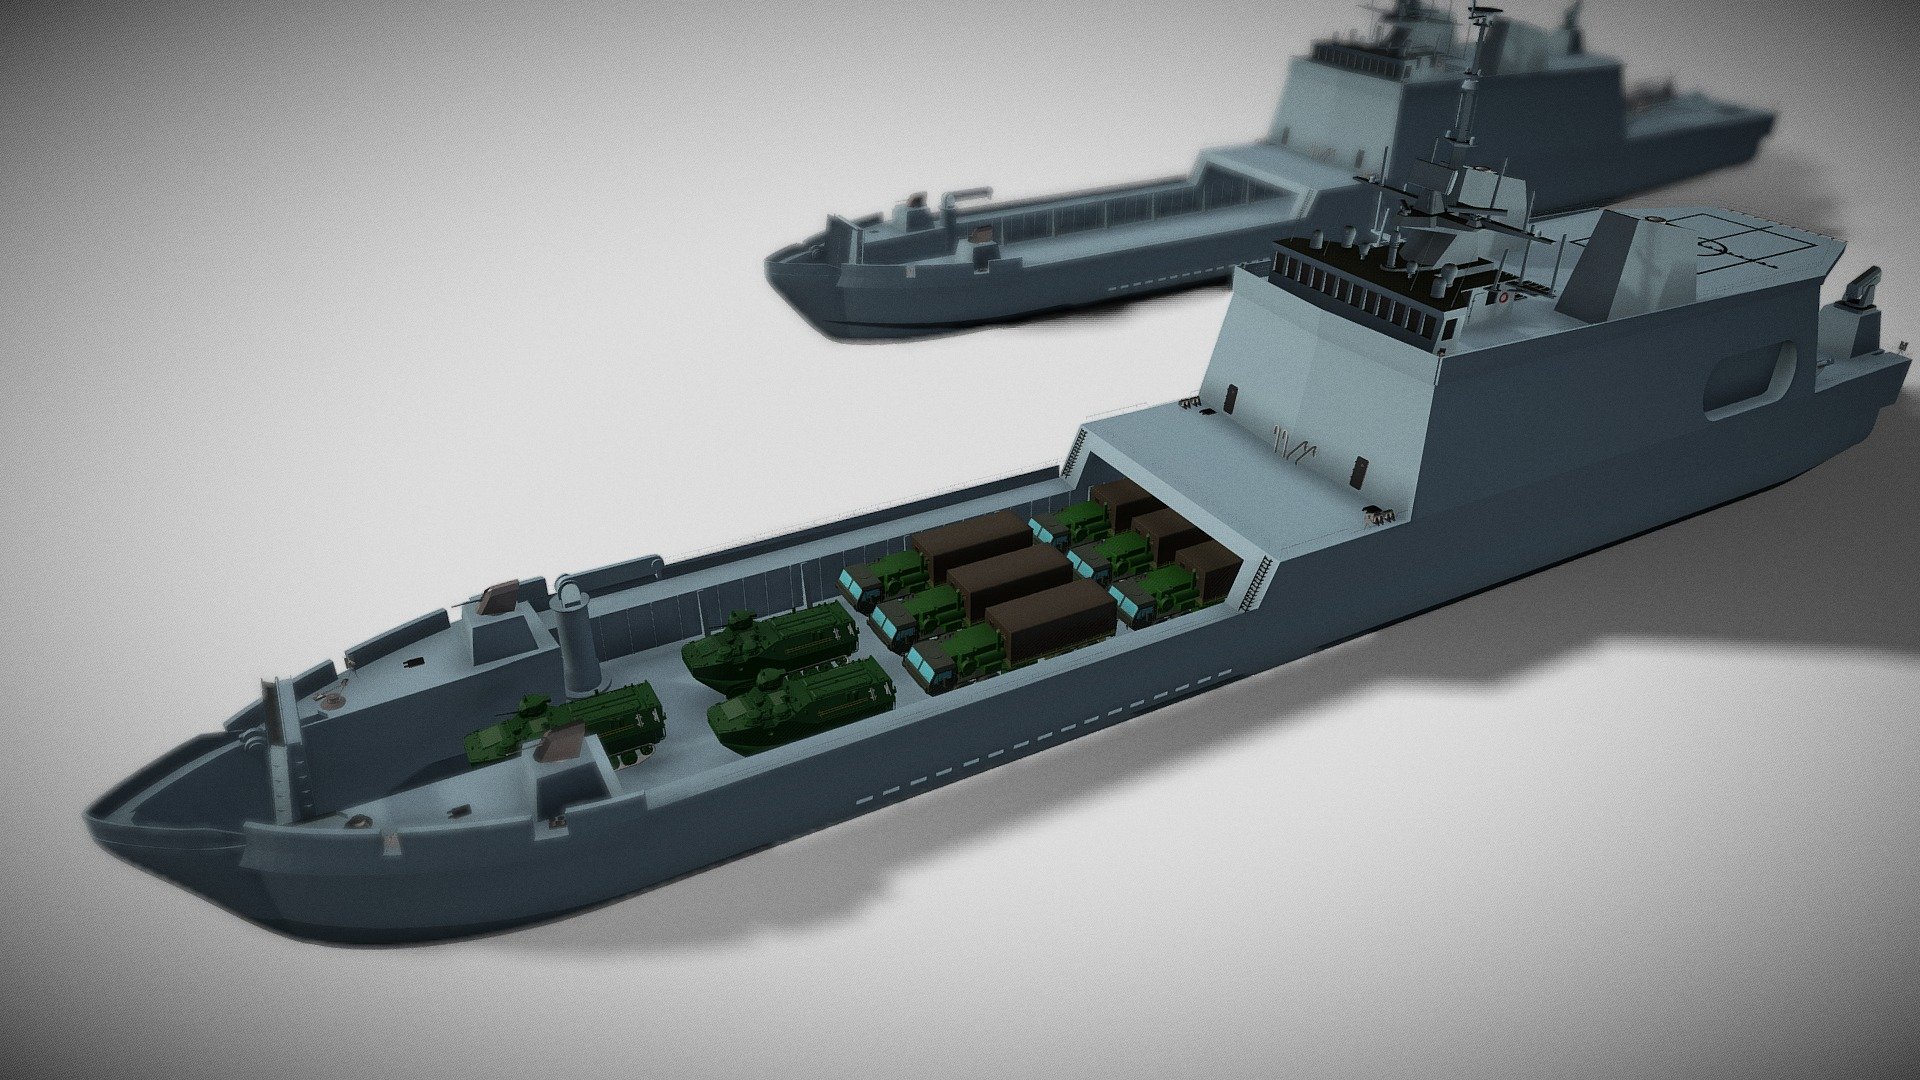 The Light Amphibious Assault Warship (LAAWS), also known as the Guadalcanal Class, is the primary ship-to-shore connector for the US Navy. Its purpose is to transport US Marines and their equipment to islands alongside larger helicopter assault ships and landing docks.

There are two variants of the LAAWS: Block I and Block II, measuring 160m and 190m in length, respectively. Block I can accommodate 100 Marines and their equipment for up to 6 weeks at sea. Block II features a hangar for launching and recovering helicopters, UAVs, and USVs. It is also equipped with double the number of Vertical Launch System (VLS) cells.

The LAAWS is heavily armed, with 32 or 64 Mk41 VLS cells, 2x 57mm cannons, 12x mounts for M2 heavy machine guns, one or two SeaRAM CIWS systems, and 4x Harpoon anti-shipping missiles. Designed to blend in with commercial ships, the LAAWS operates in littoral waters, striking targets on both land and sea.

Learn more at https://killcapturedestroy.com/ - Light Amphibious Assault Warship v2 - 3D model by KillCaptureDestroy (@jloiacono82) 3d model